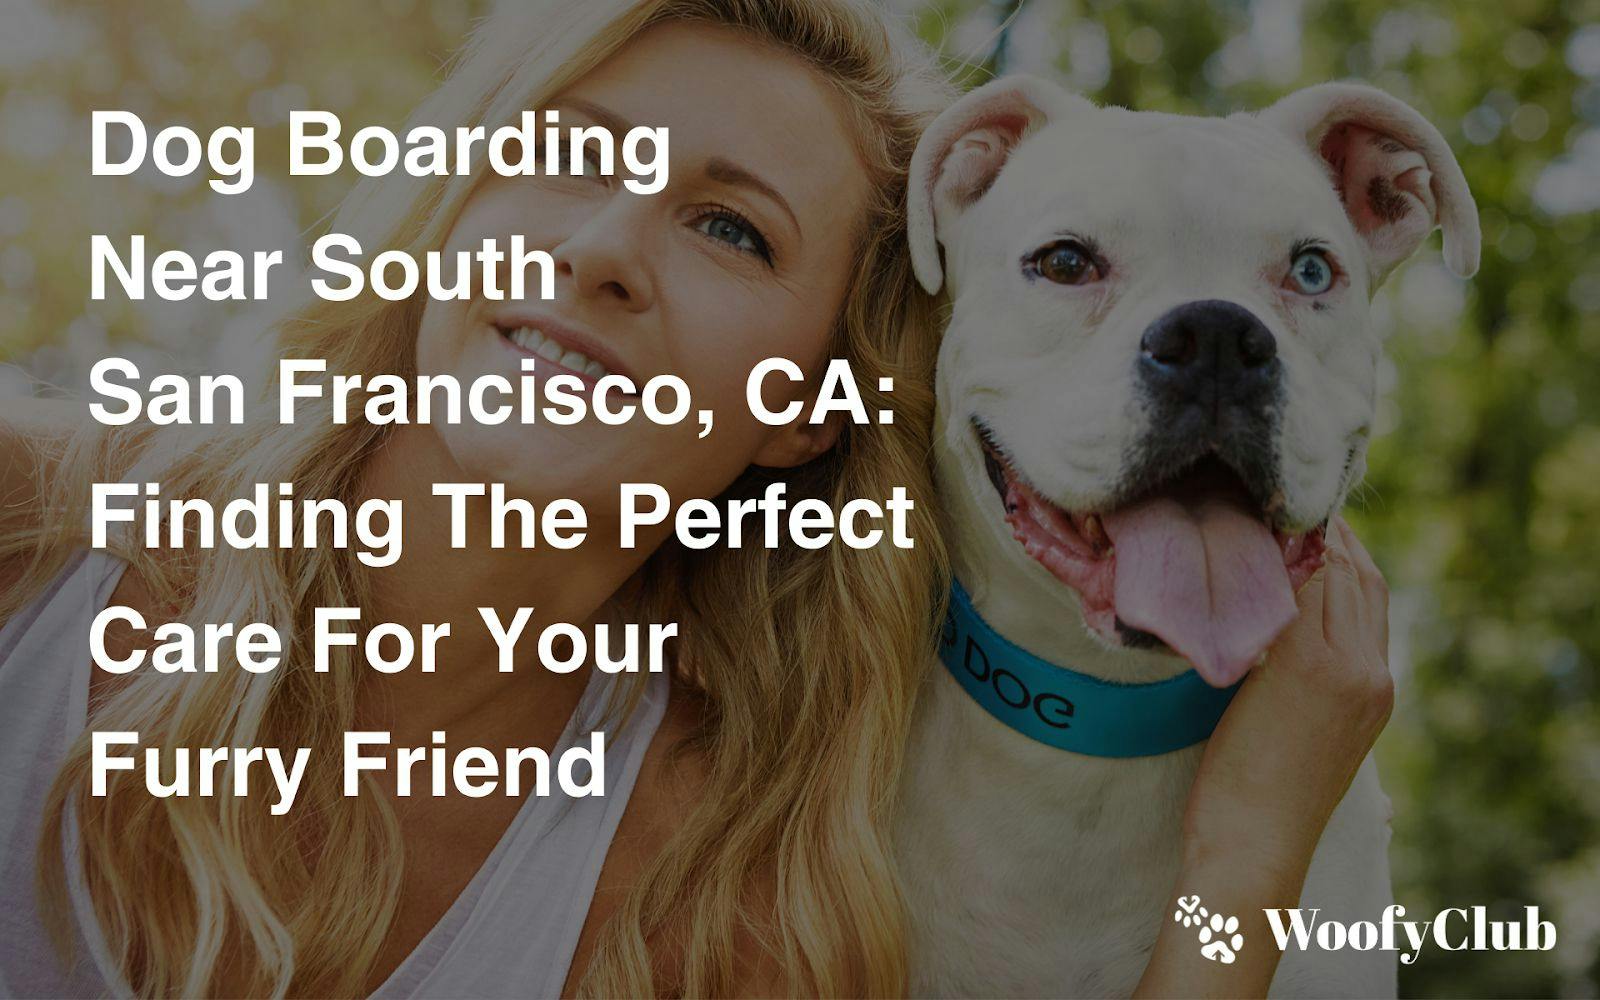 Dog Boarding Near South San Francisco, CA: Finding The Perfect Care For Your Furry Friend